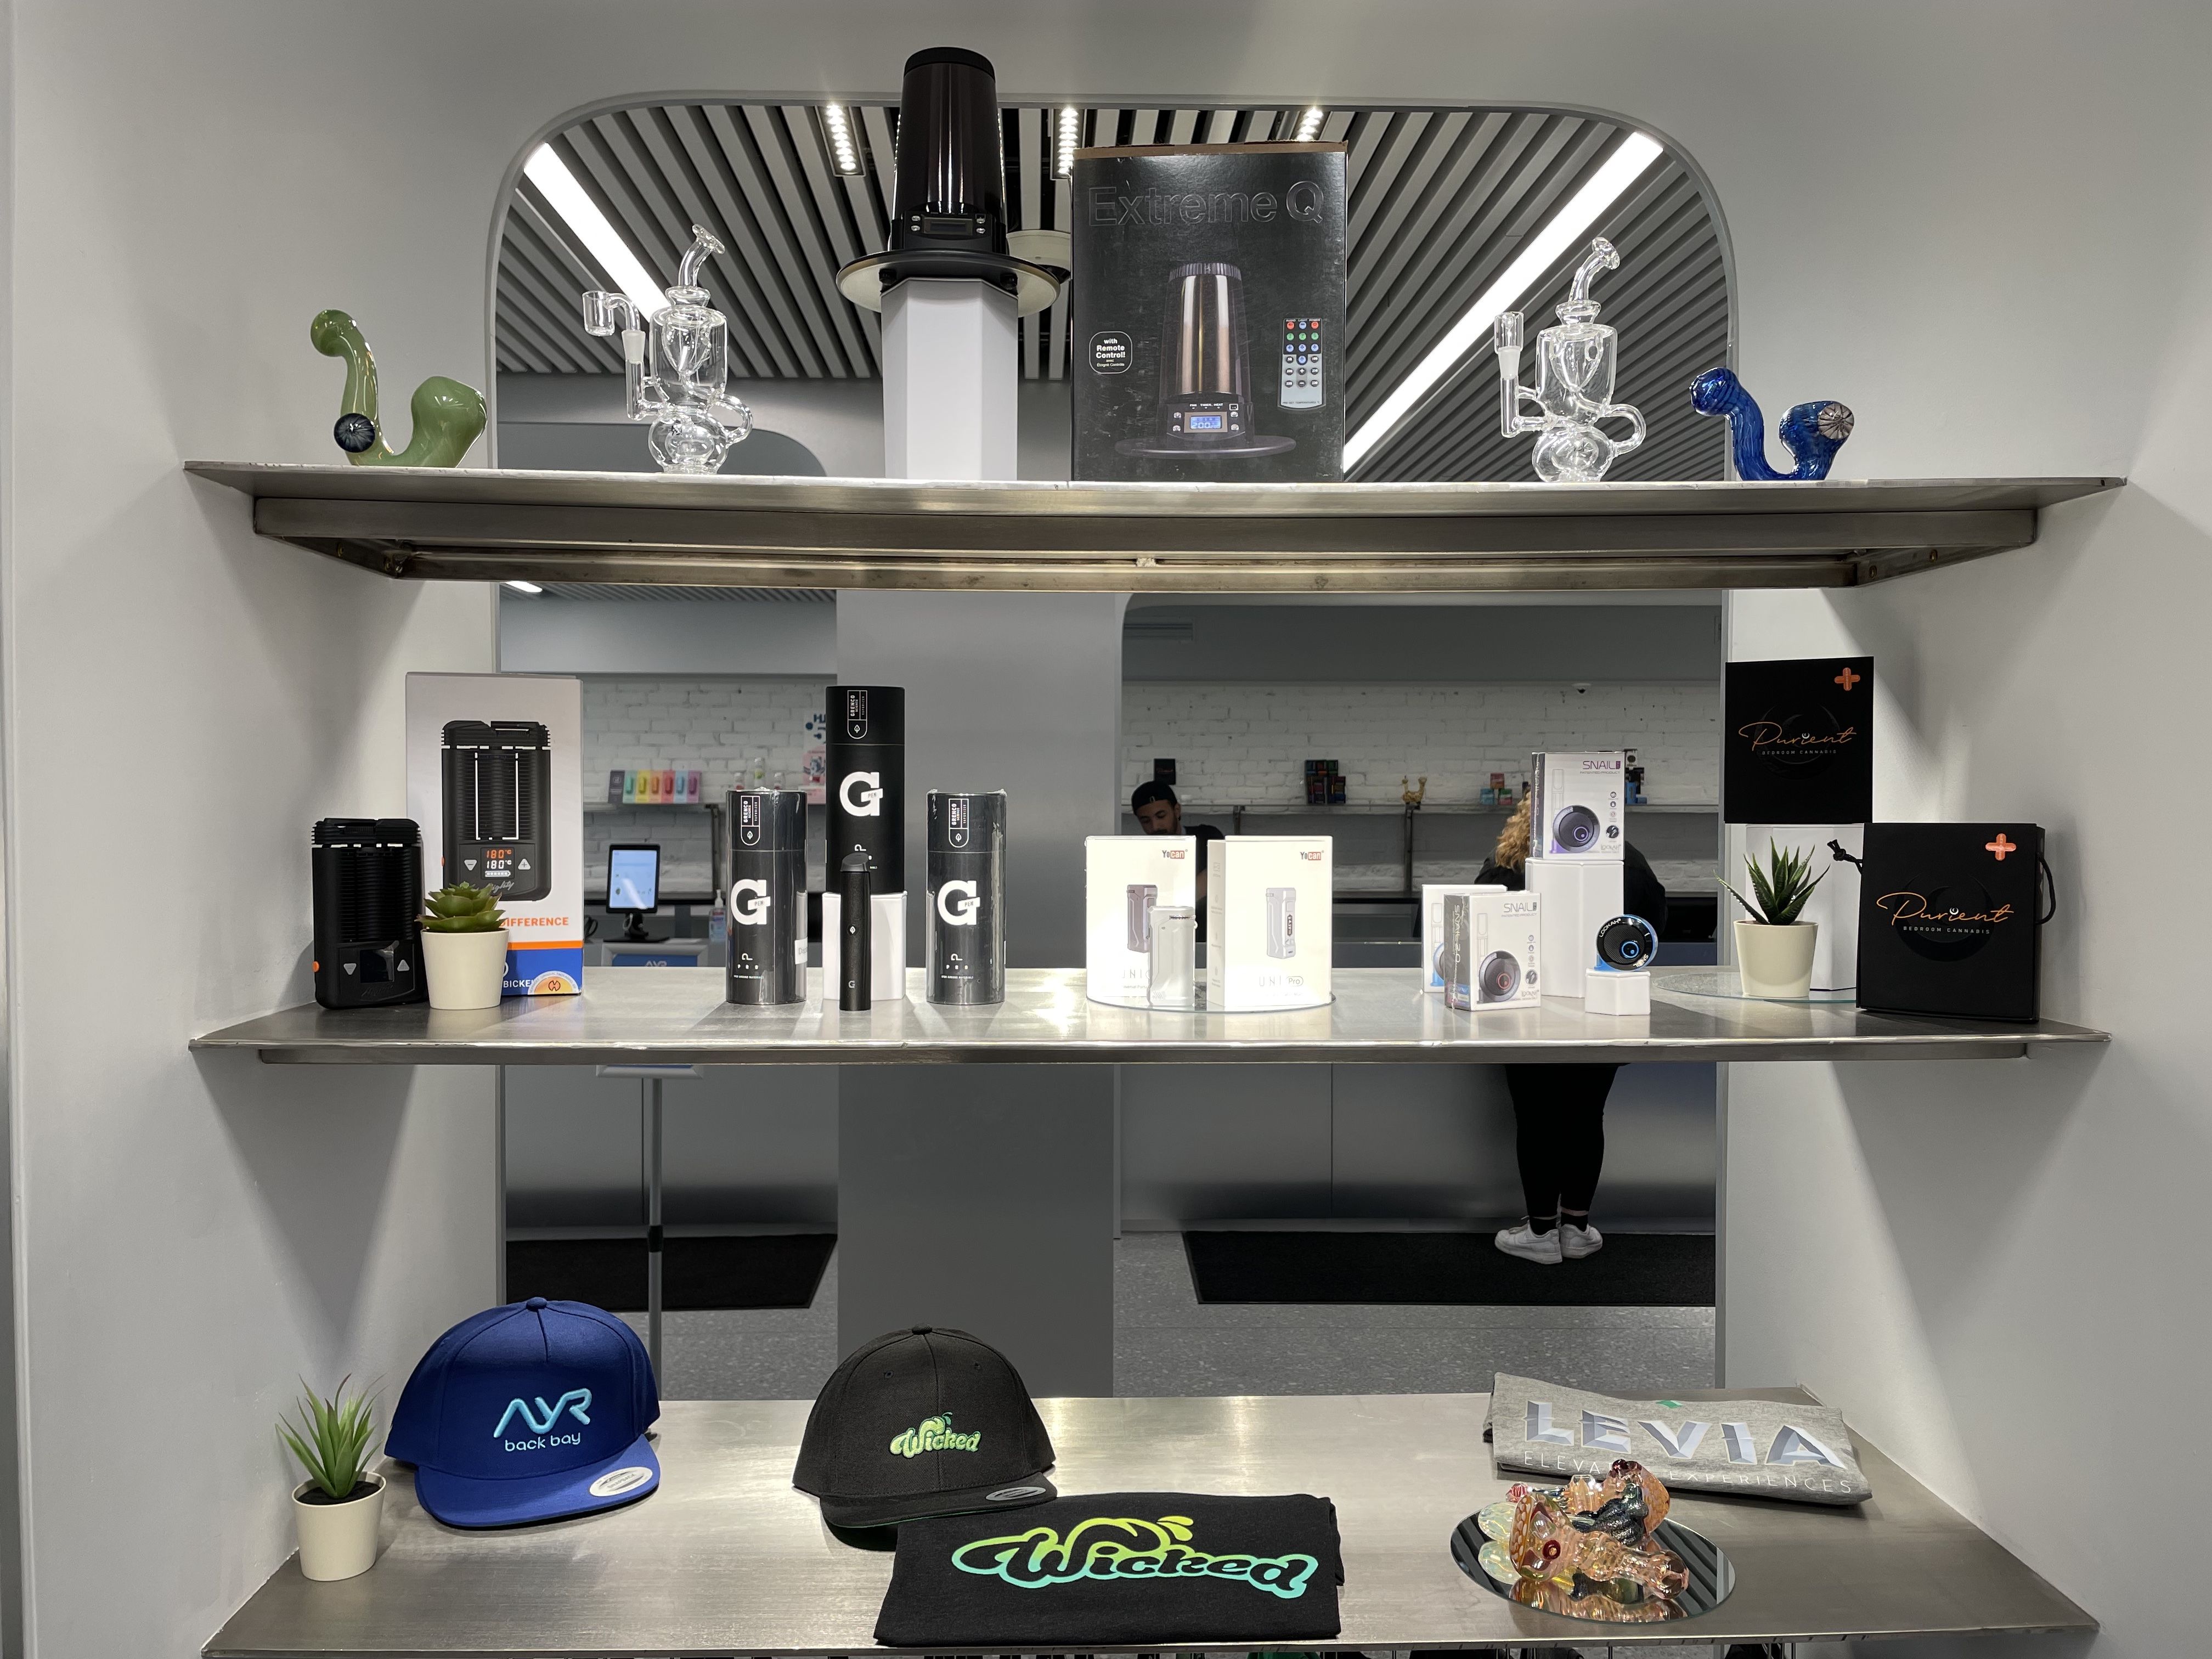 Three product shelves include baseball caps, a black T-shirt, a multicolored cannabis bowl and other products.